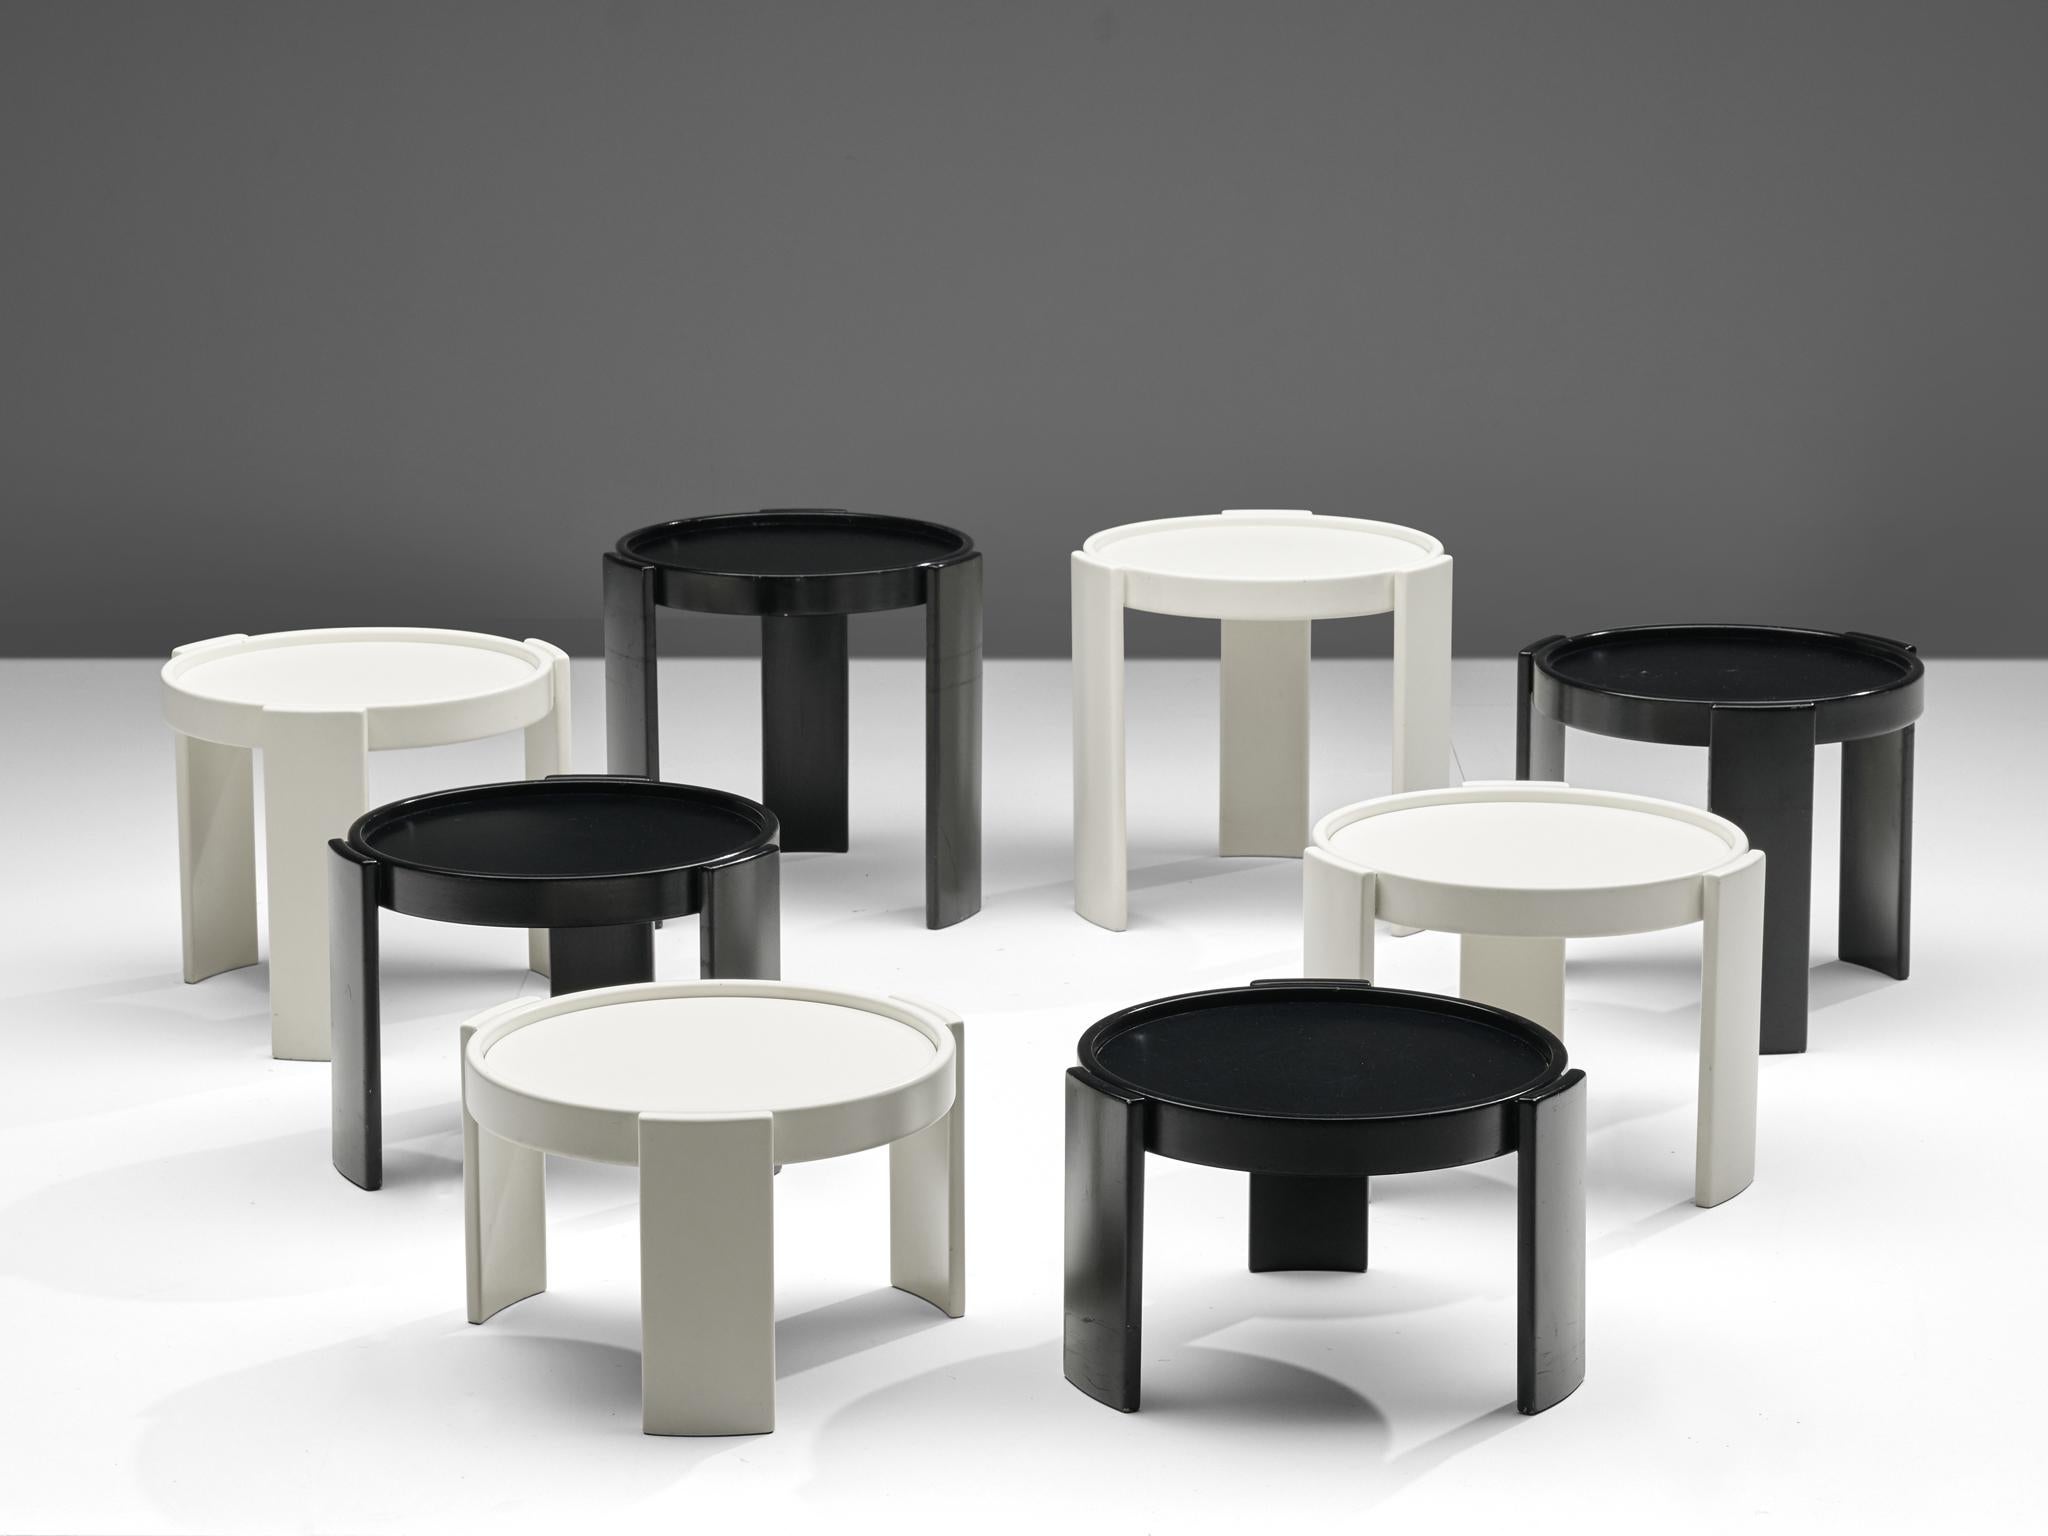 Gianfranco Frattini for Cassina, nesting table, white and black lacquered wood, Italy, 1960s

These nesting tables are designed by Gianfranco Frattini for Cassina. Half of the tables are white, while the other half is black lacquered wood, round